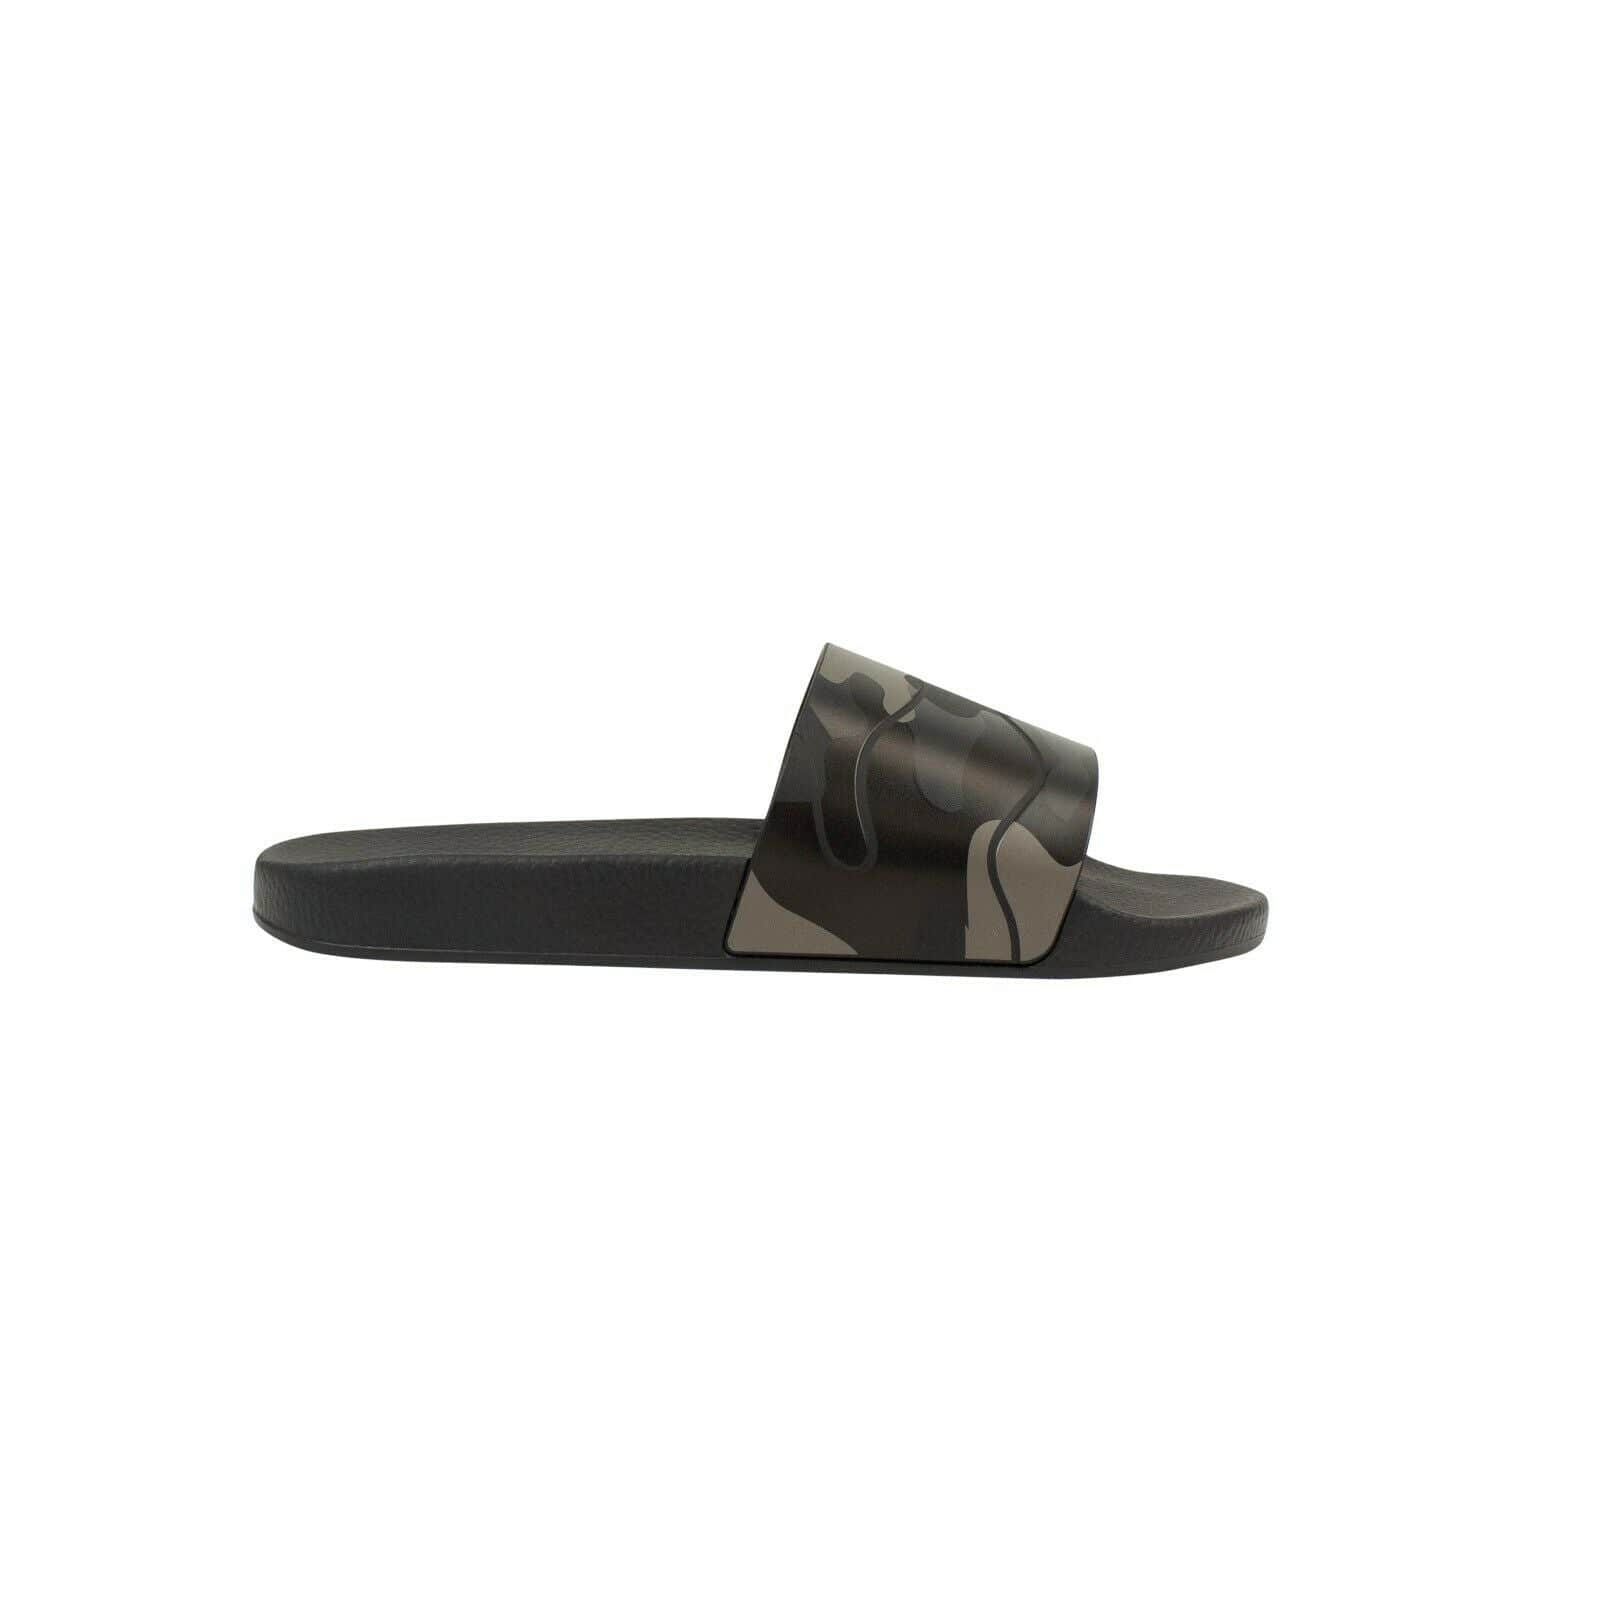 Valentino channelenable-all, chicmi, couponcollection, gender-mens, main-shoes, mens-slides-slippers, size-39, size-40, size-41, size-42, size-43, under-250, valentino Black Camouflage Rubber Slides